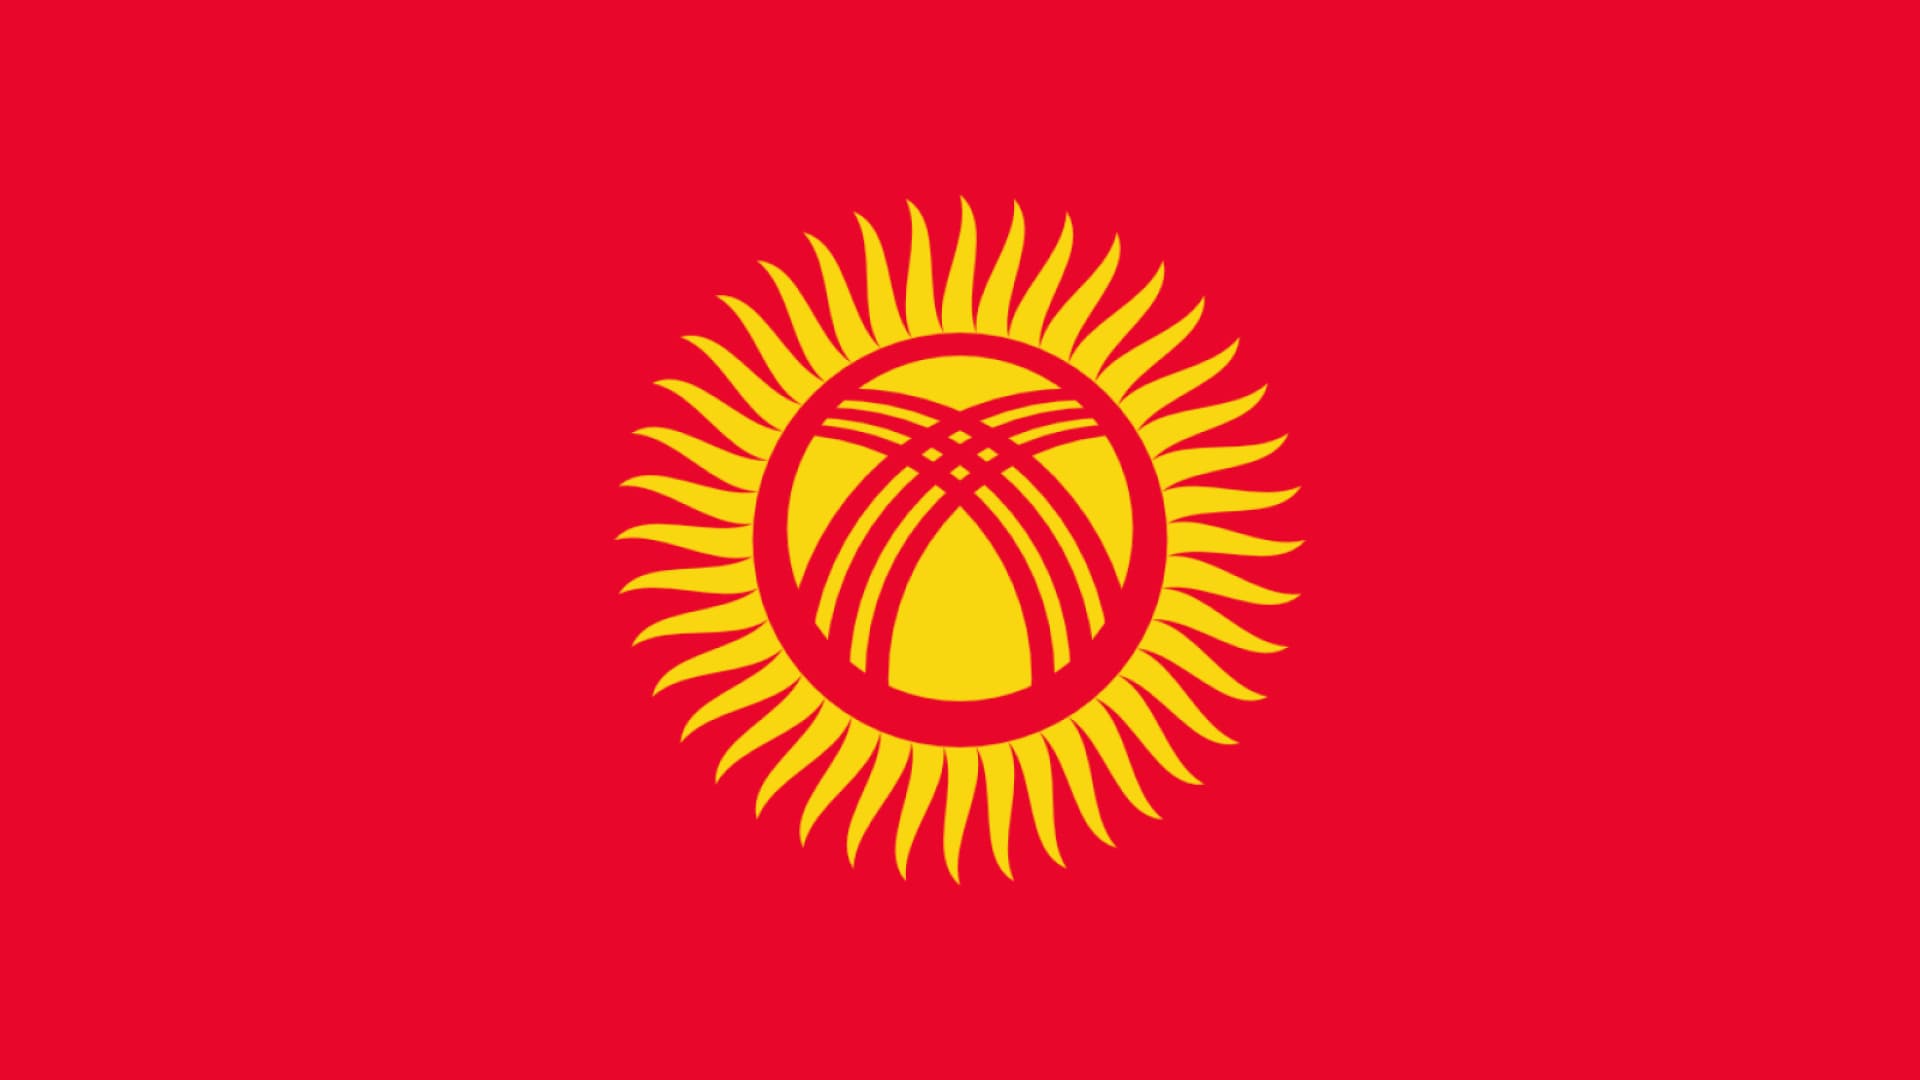 Kyrgyzstan flag is red  with a gold sun in the center.